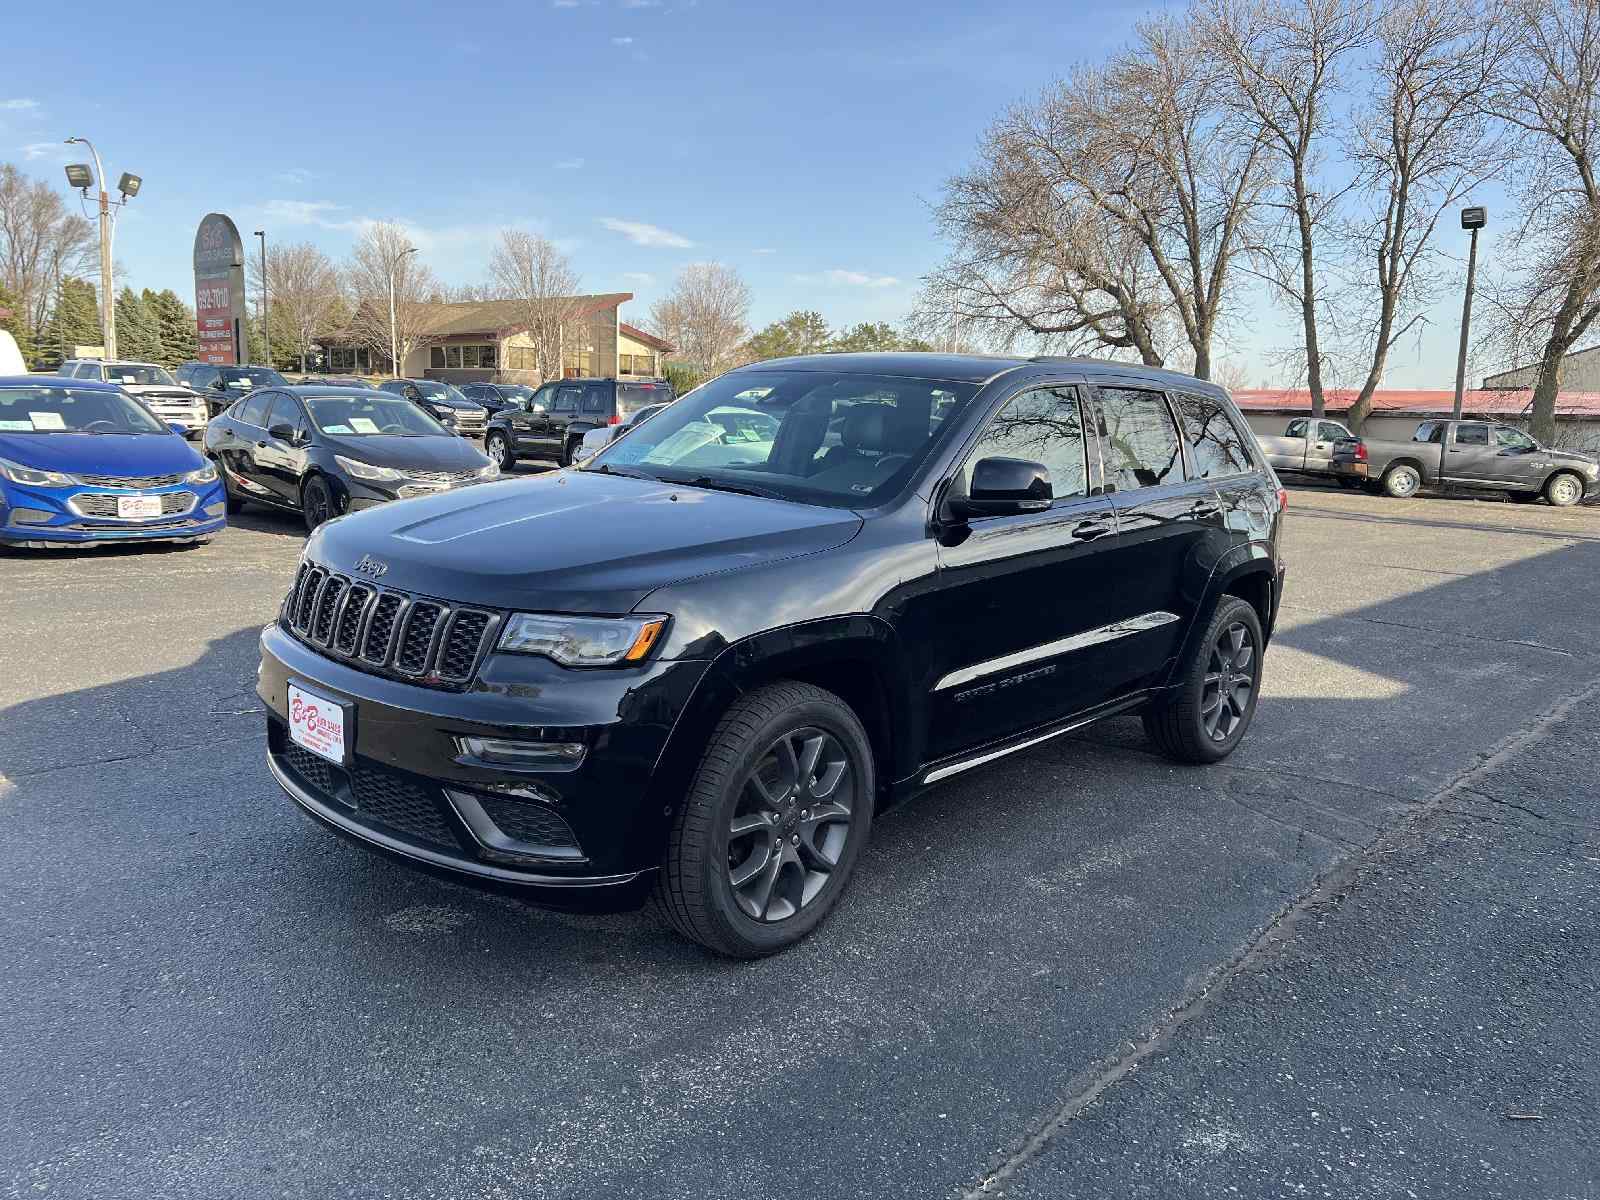 2020-jeep-grand-cherokee-for-sale-01